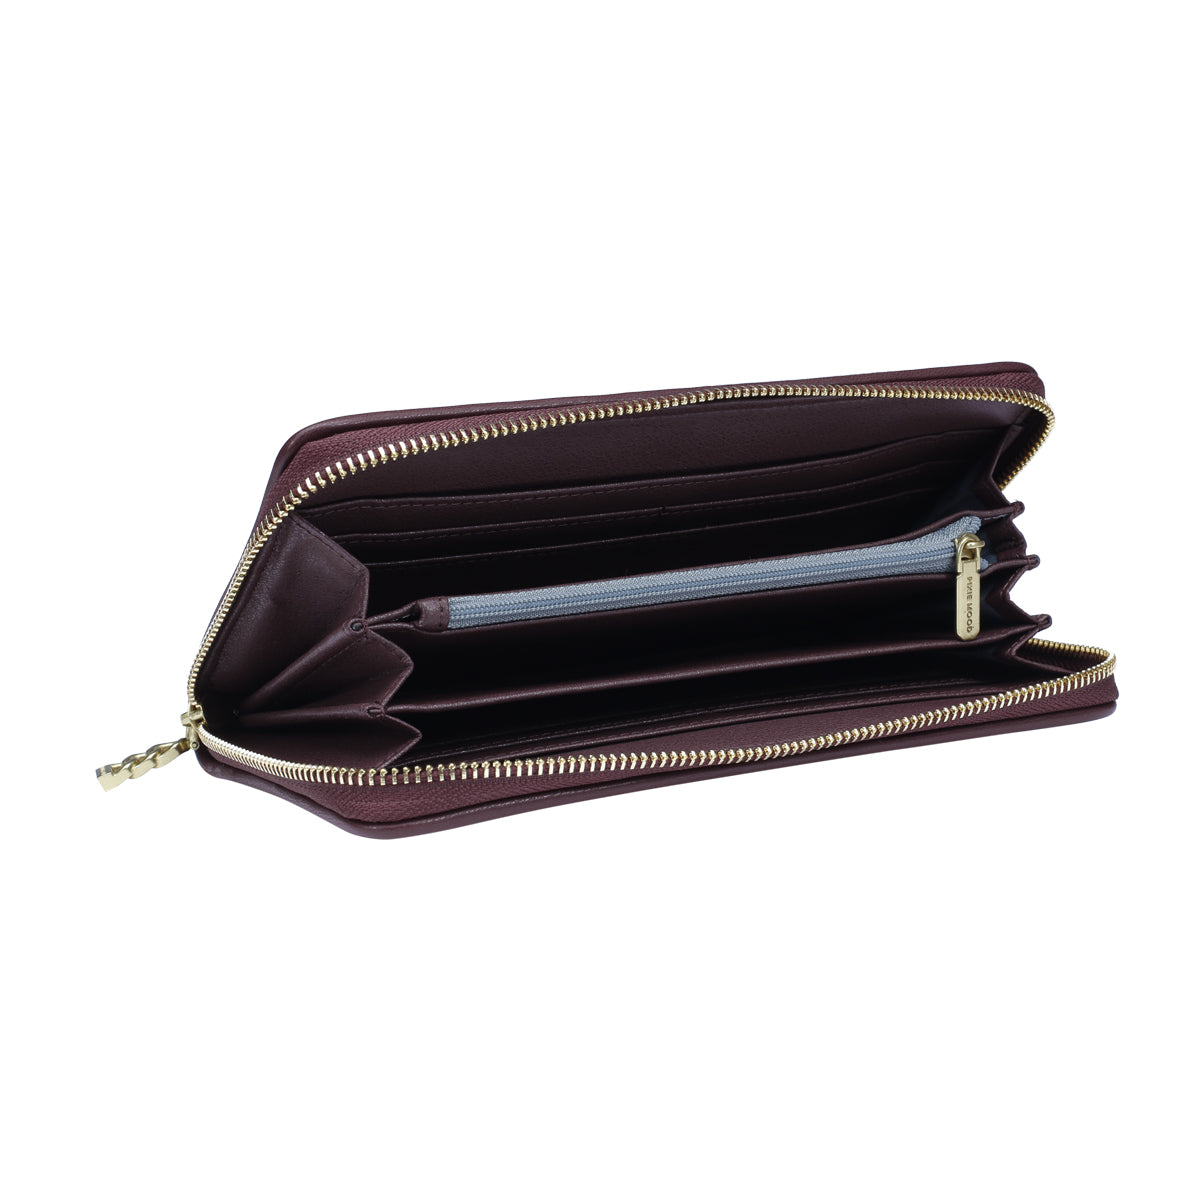 The Bubbly Wallet in Wine